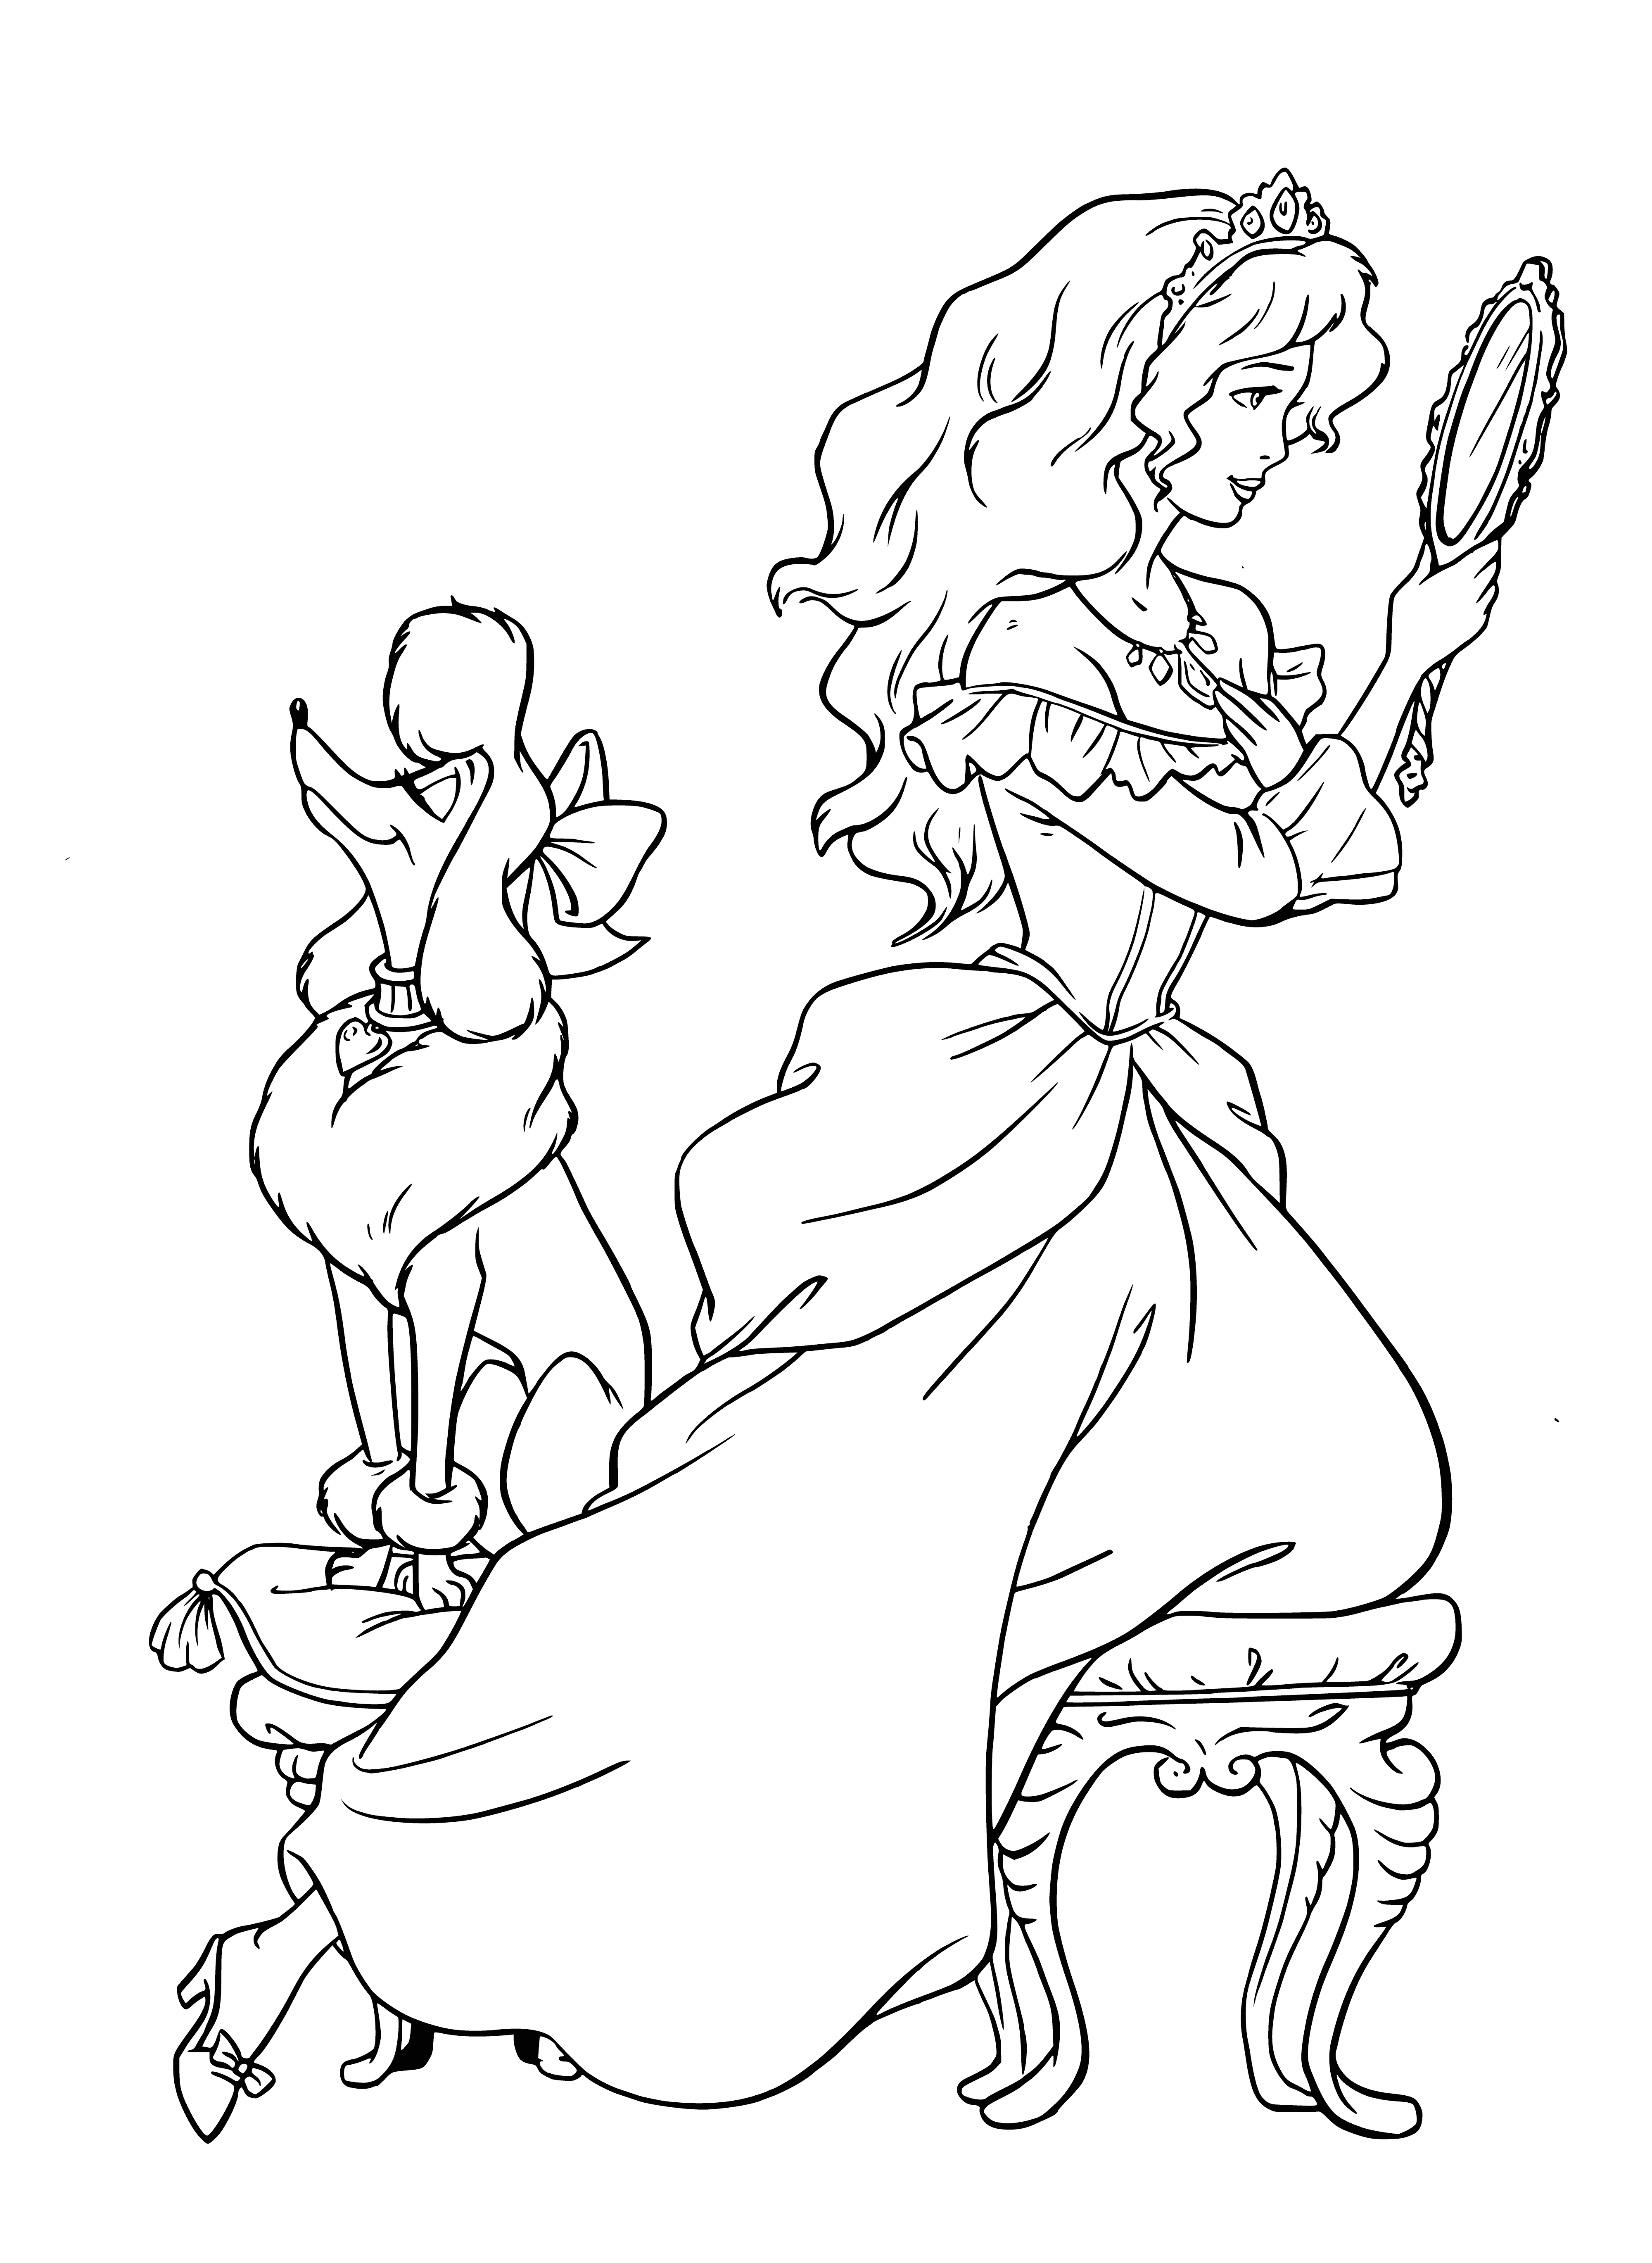 coloring page: Princess in center of coloring page wears puffed-sleeved dress, necklace of pearls and diamond tiara, holding a black cat. #coloringpages